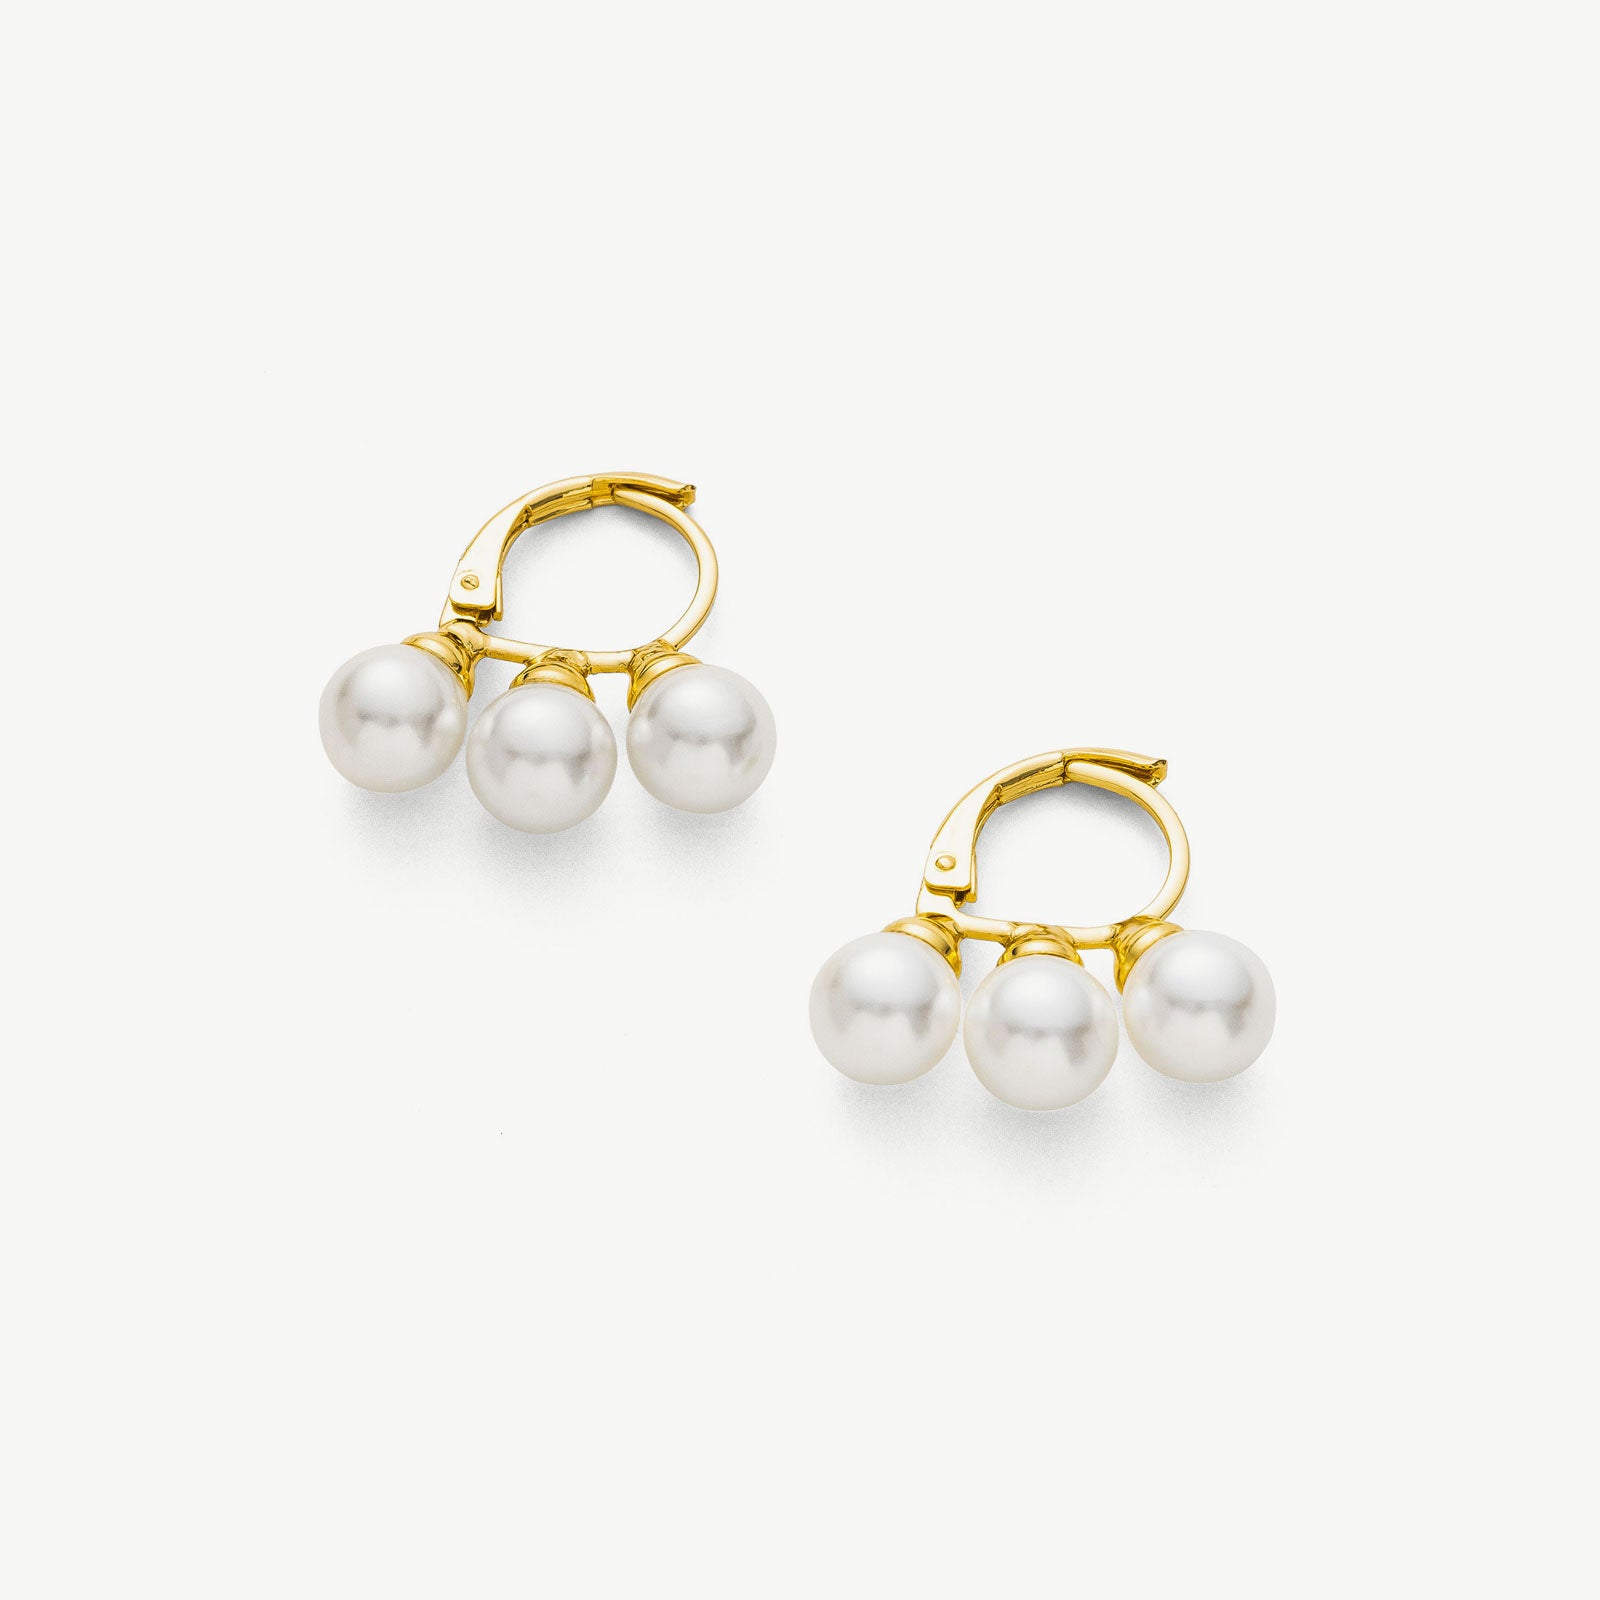 Pearl Huggies in Gold, a captivating and elegant pair of huggie earrings featuring lustrous pearls embraced by a warm and radiant golden setting